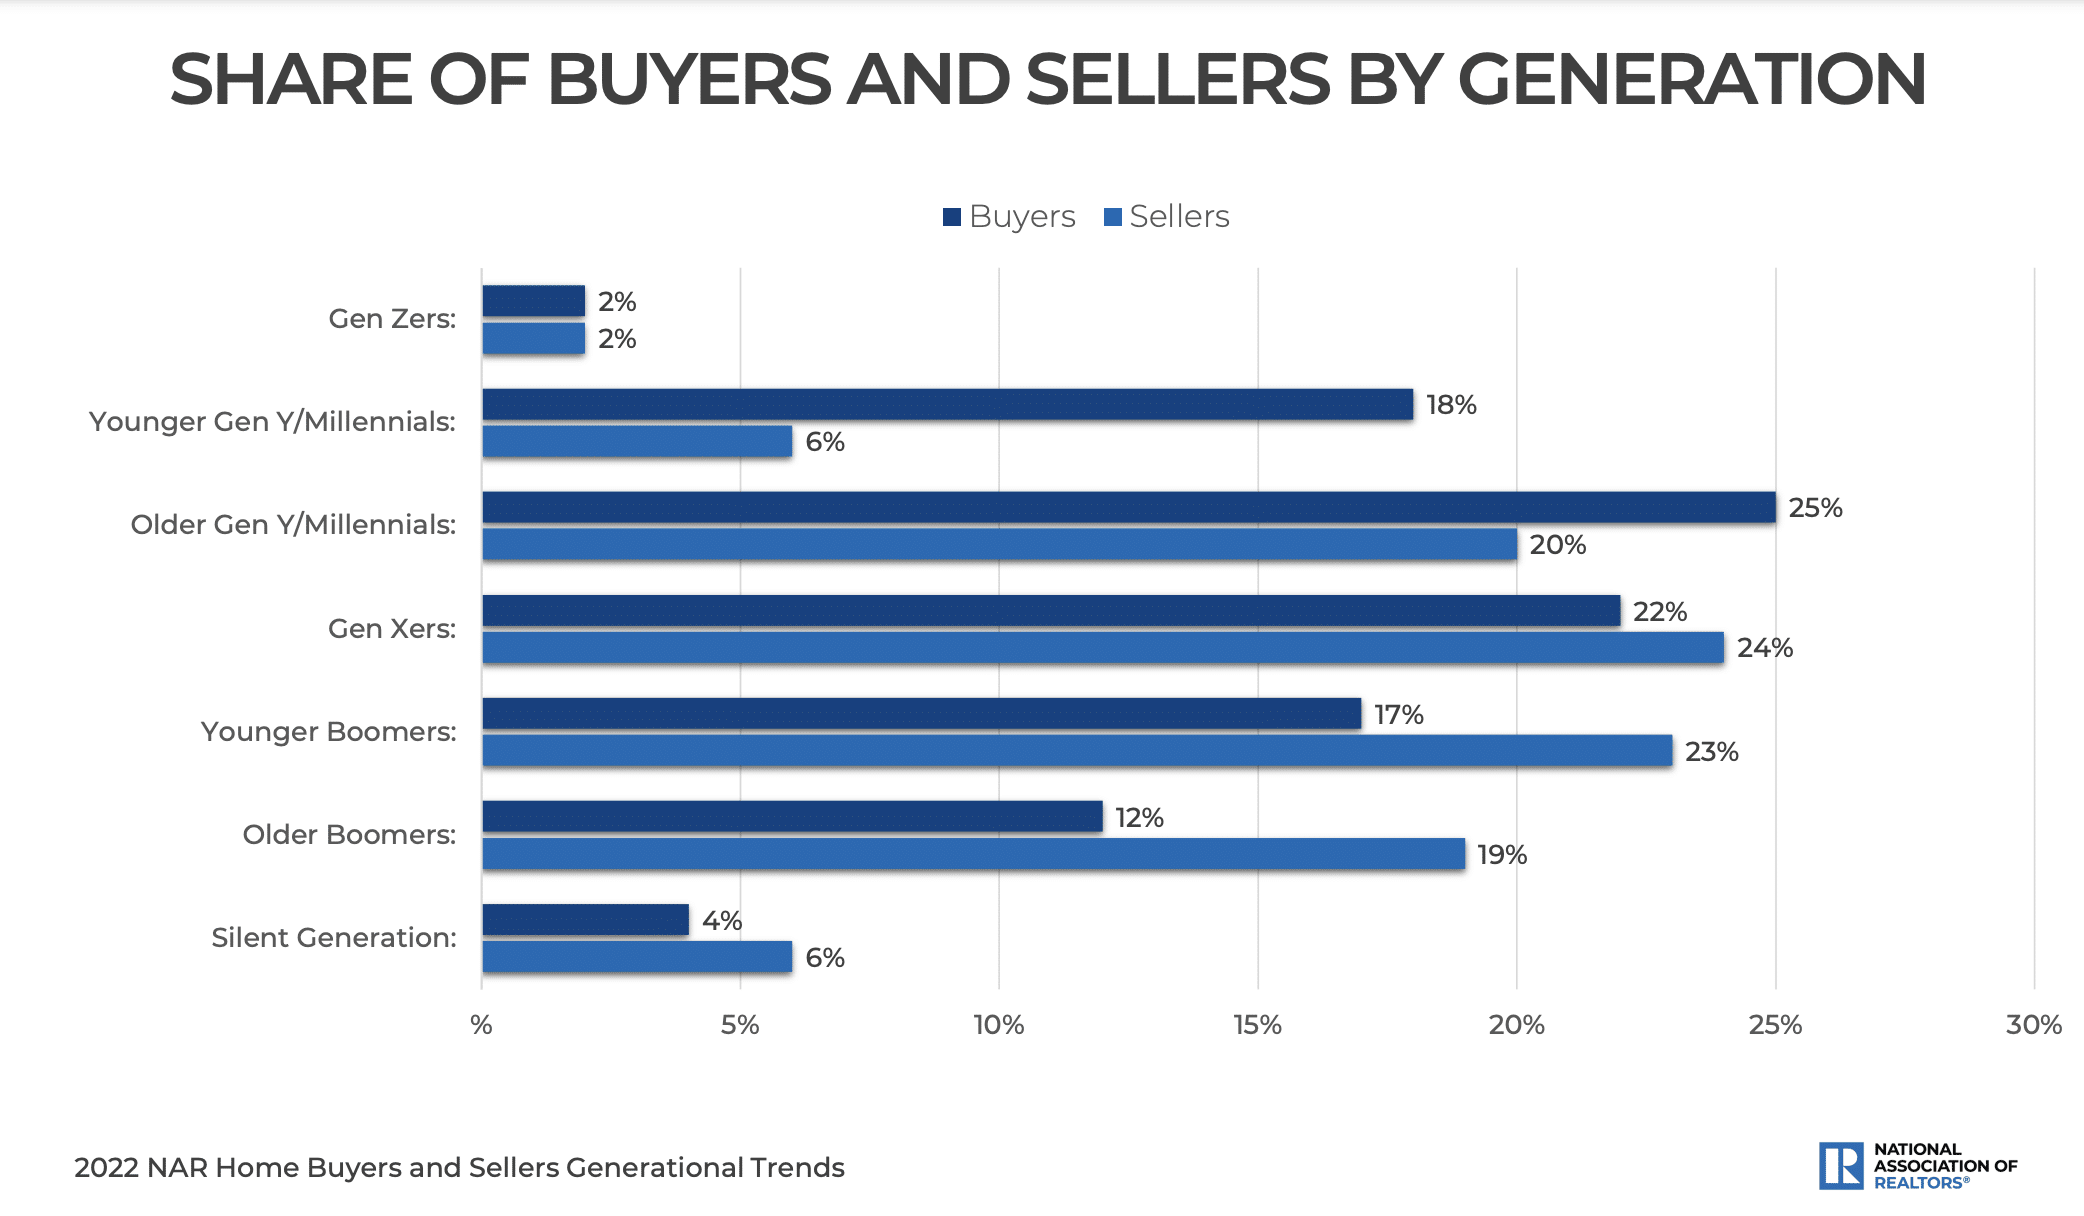 The percentage of buyers and sellers by generation